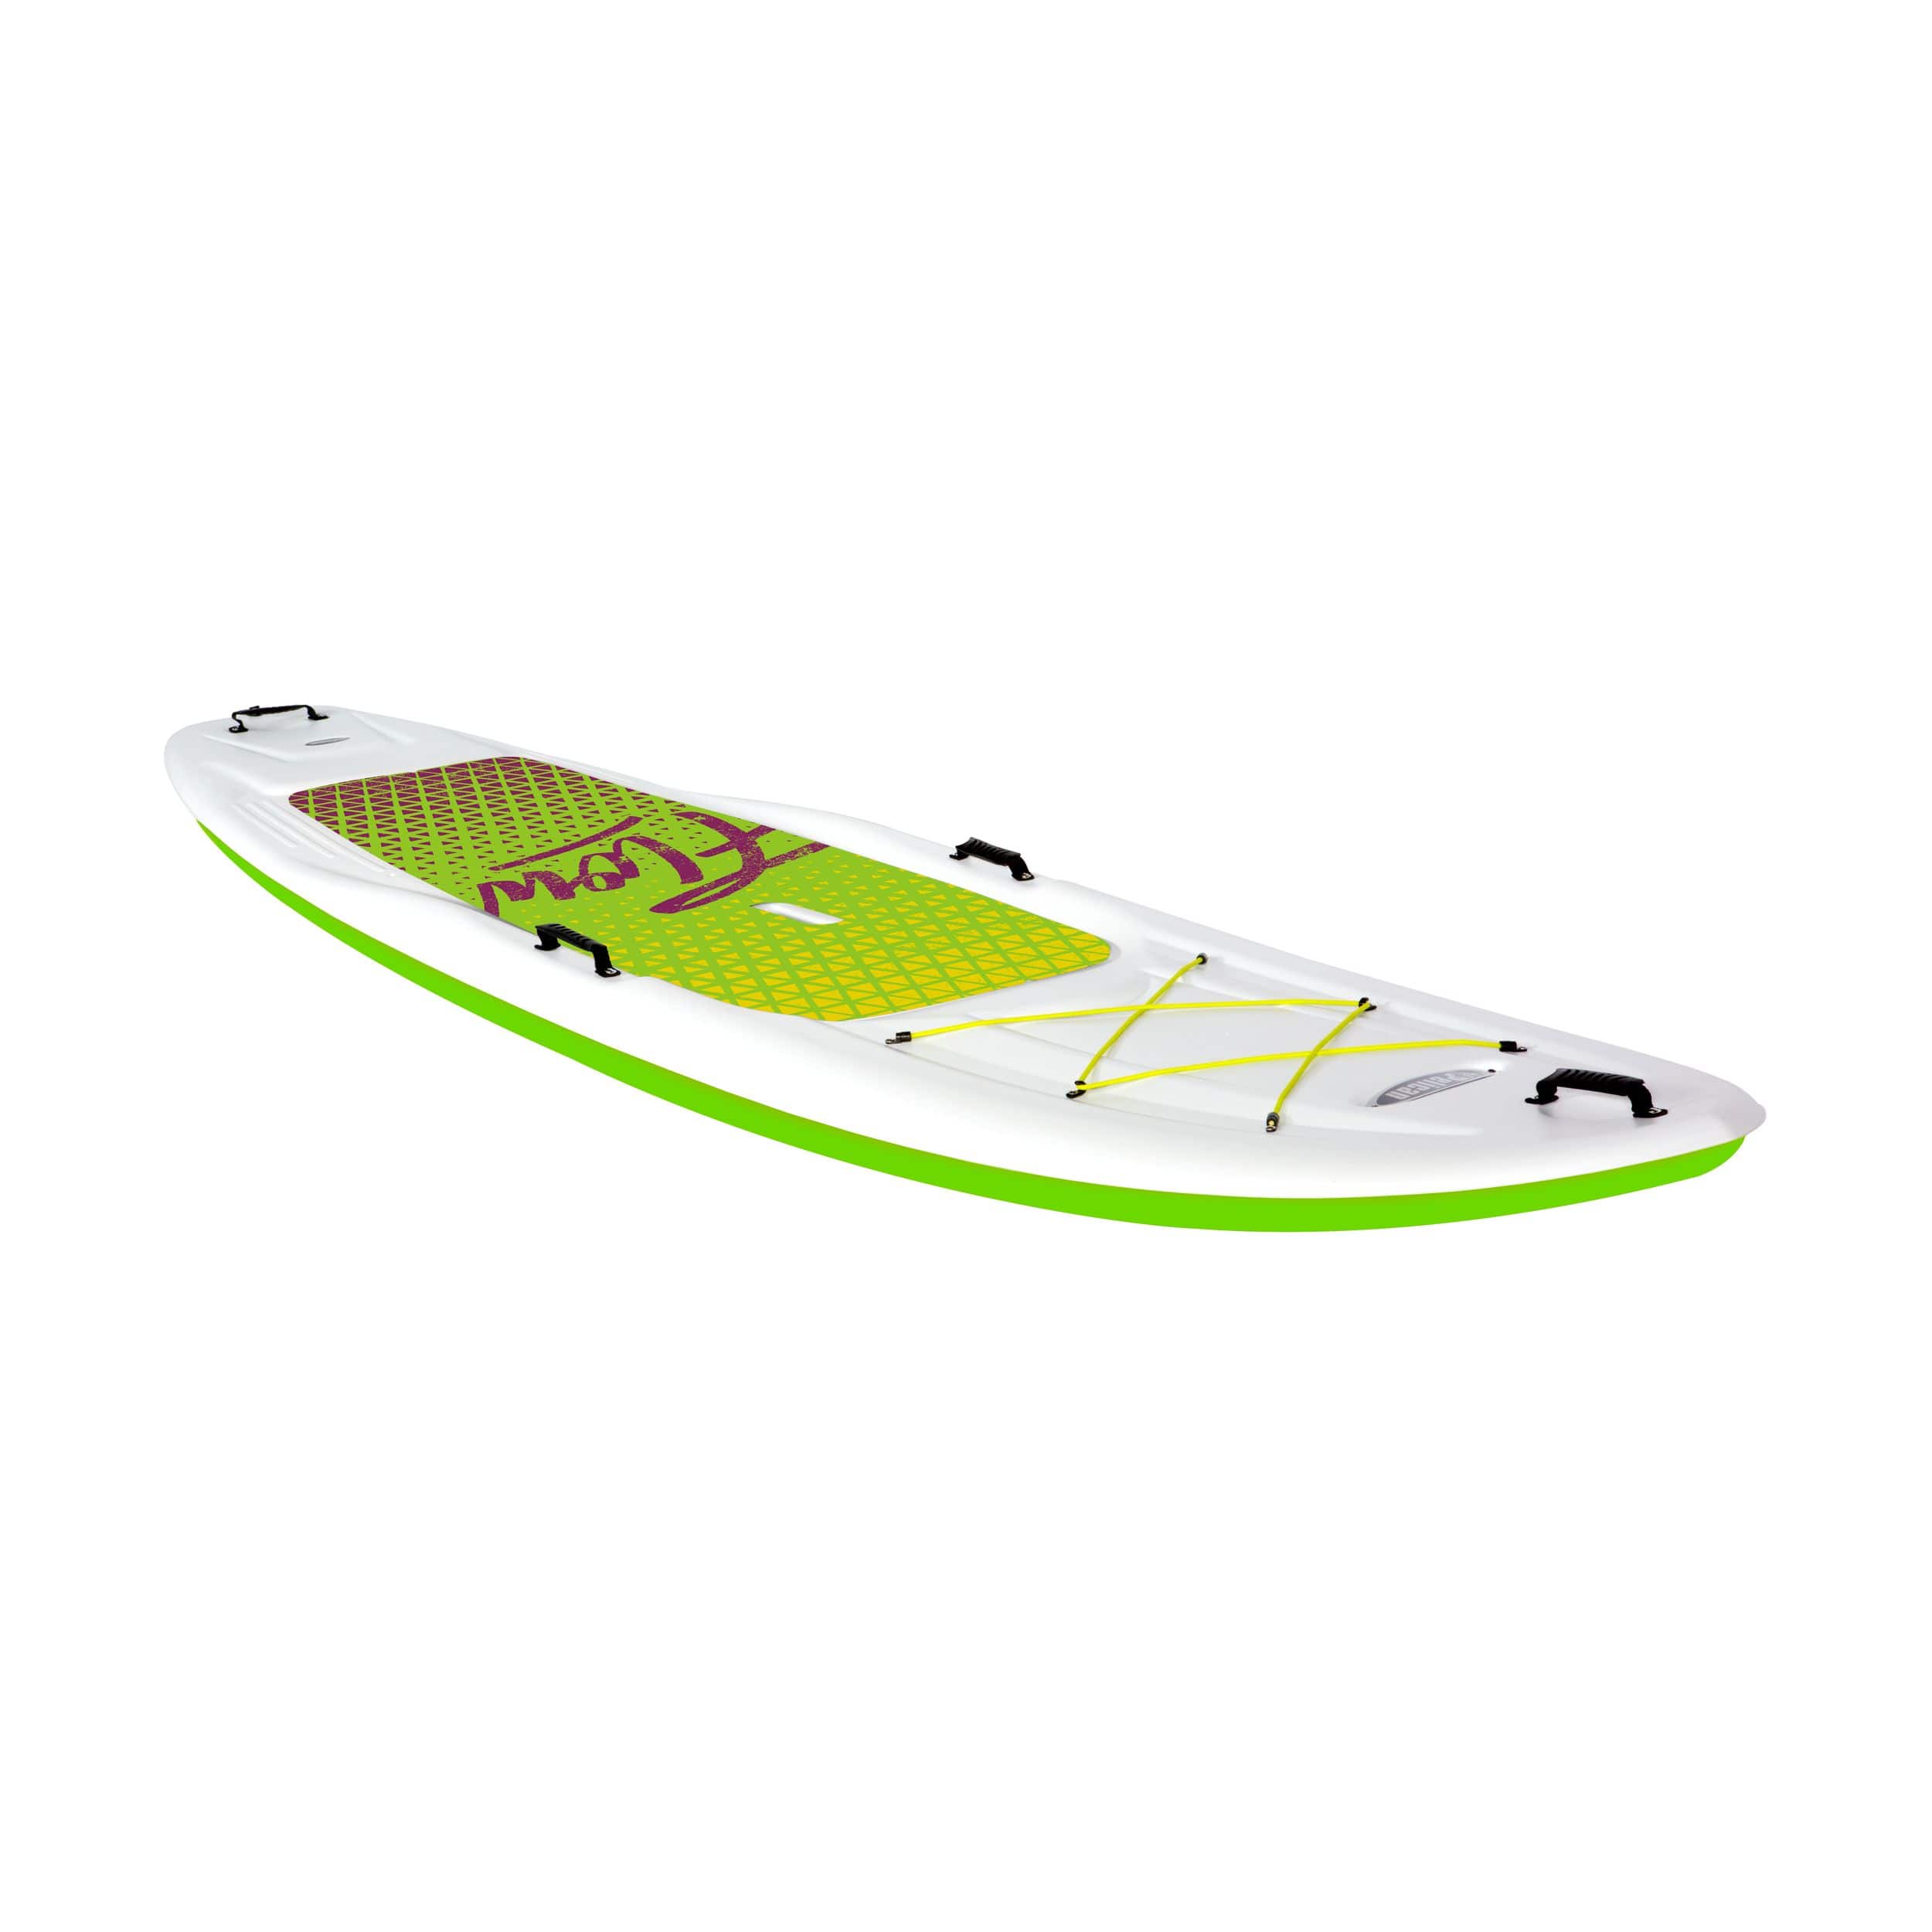 Pelican Flow 106 1-Person Stand Up Paddle Board, White/Green, 10.6